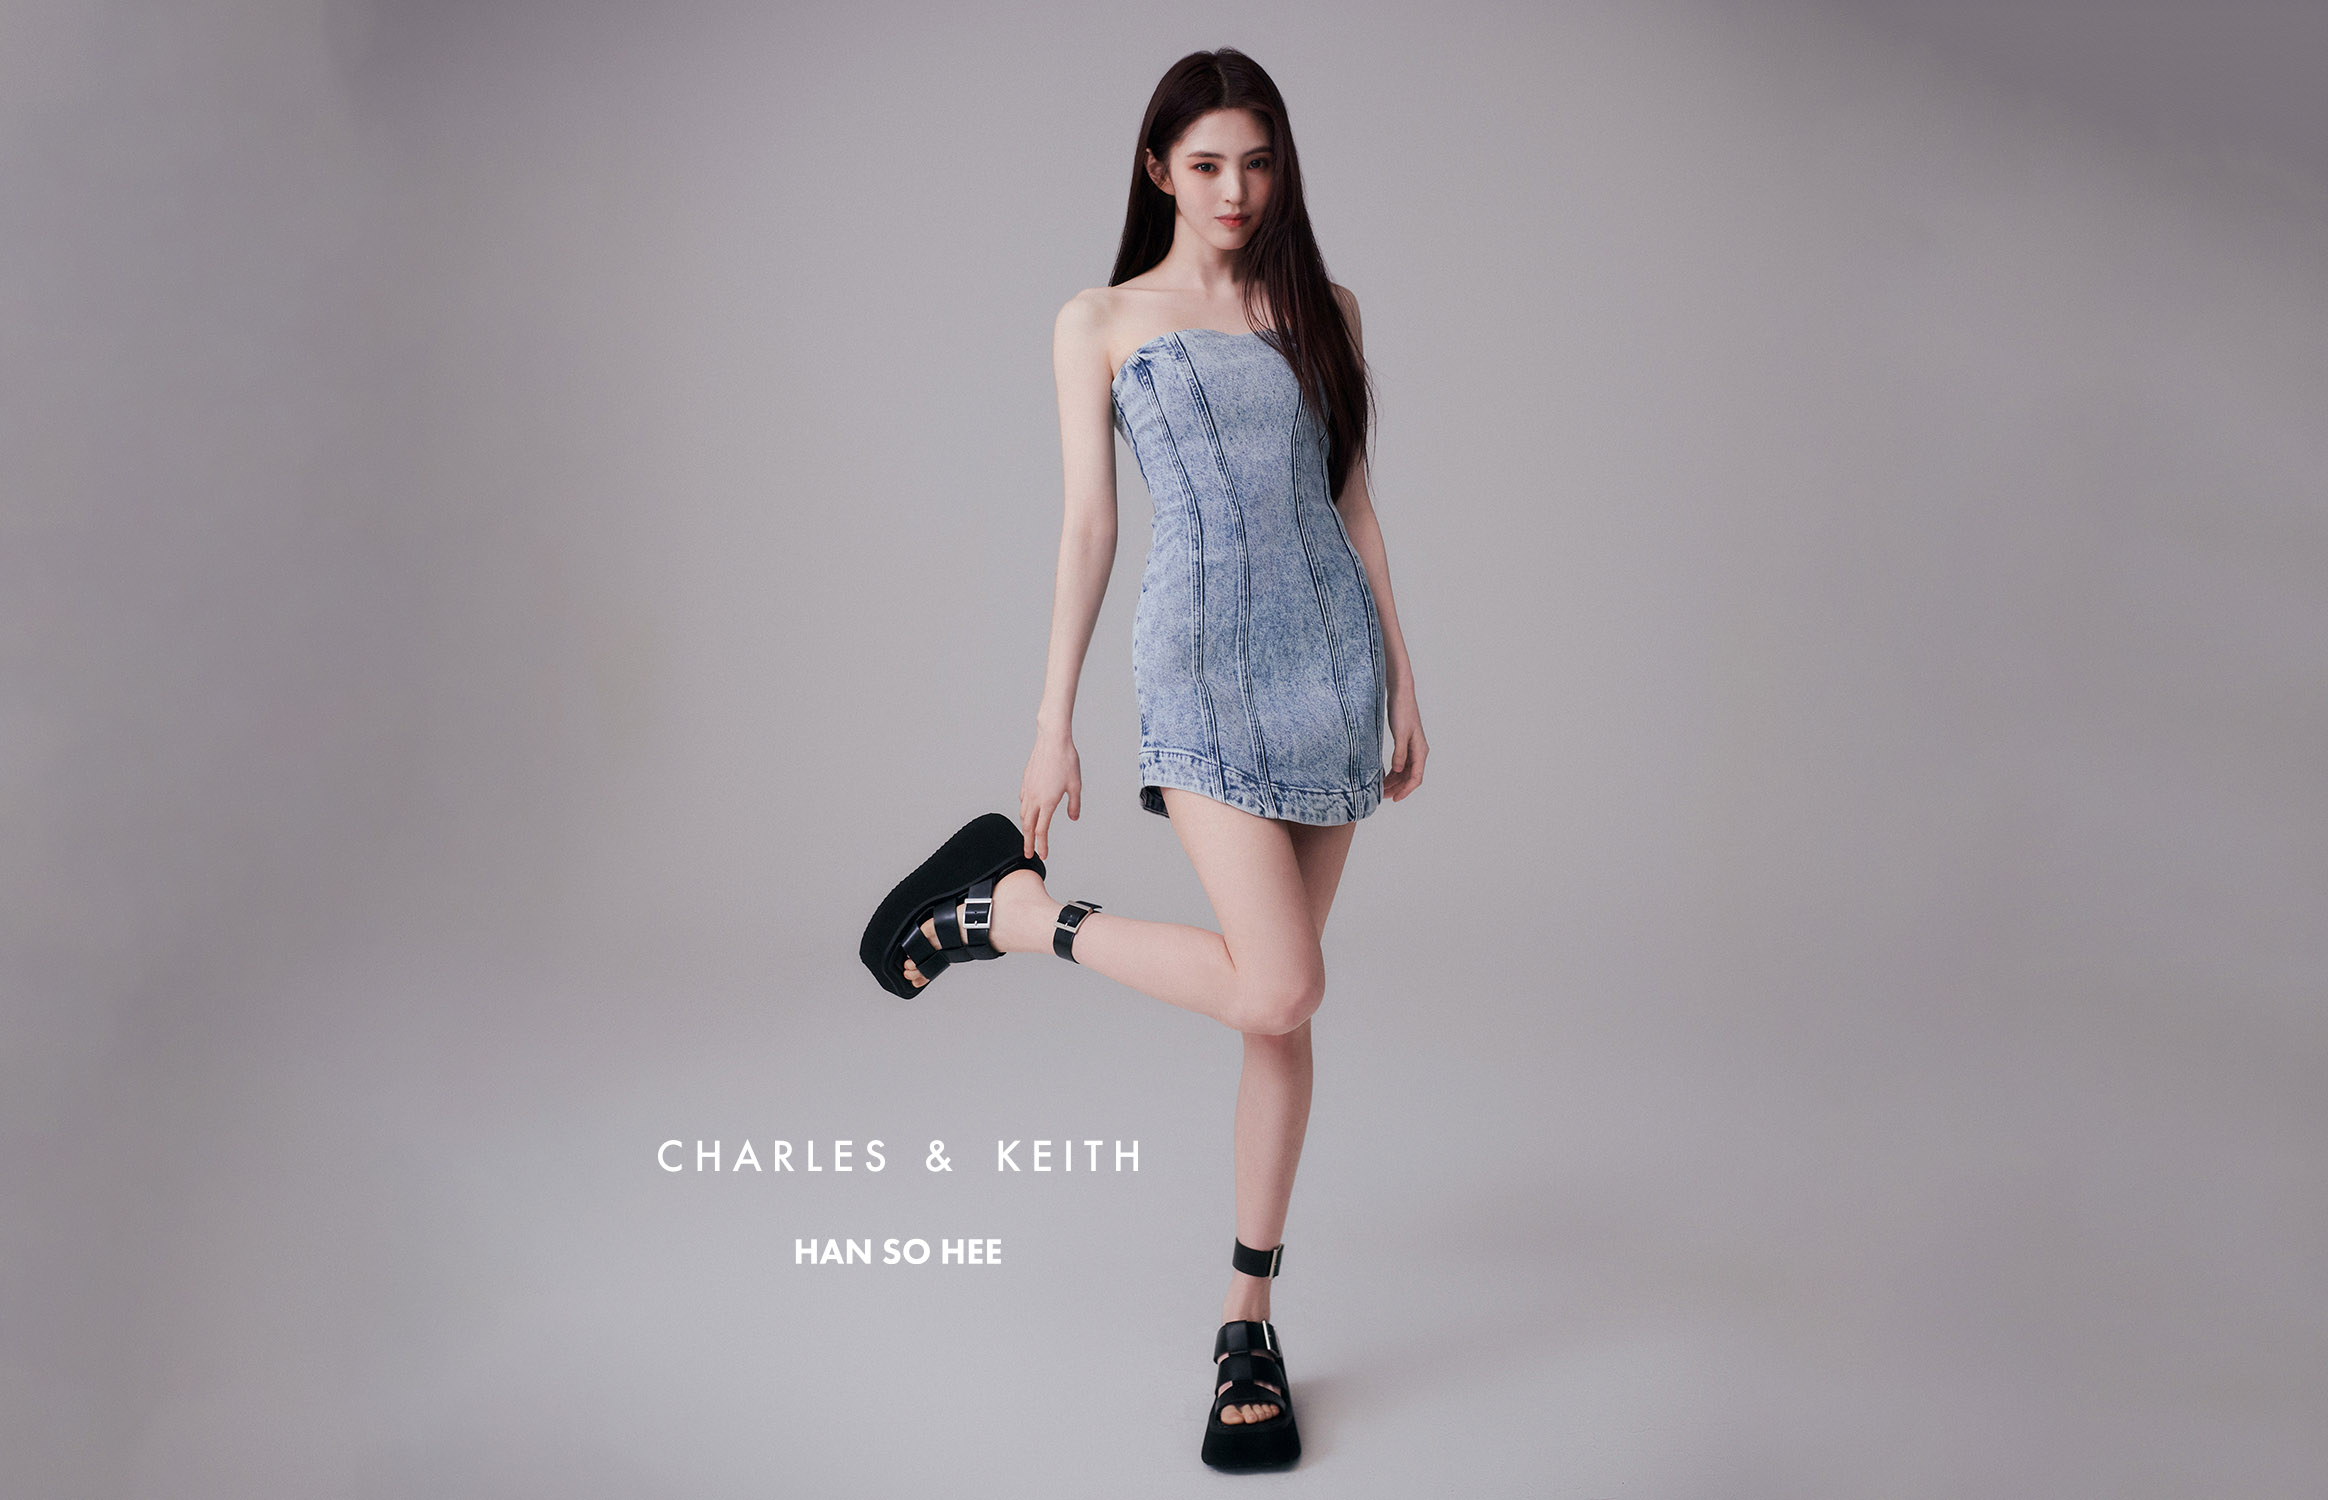 Charles & Keith Group Career Information 2023